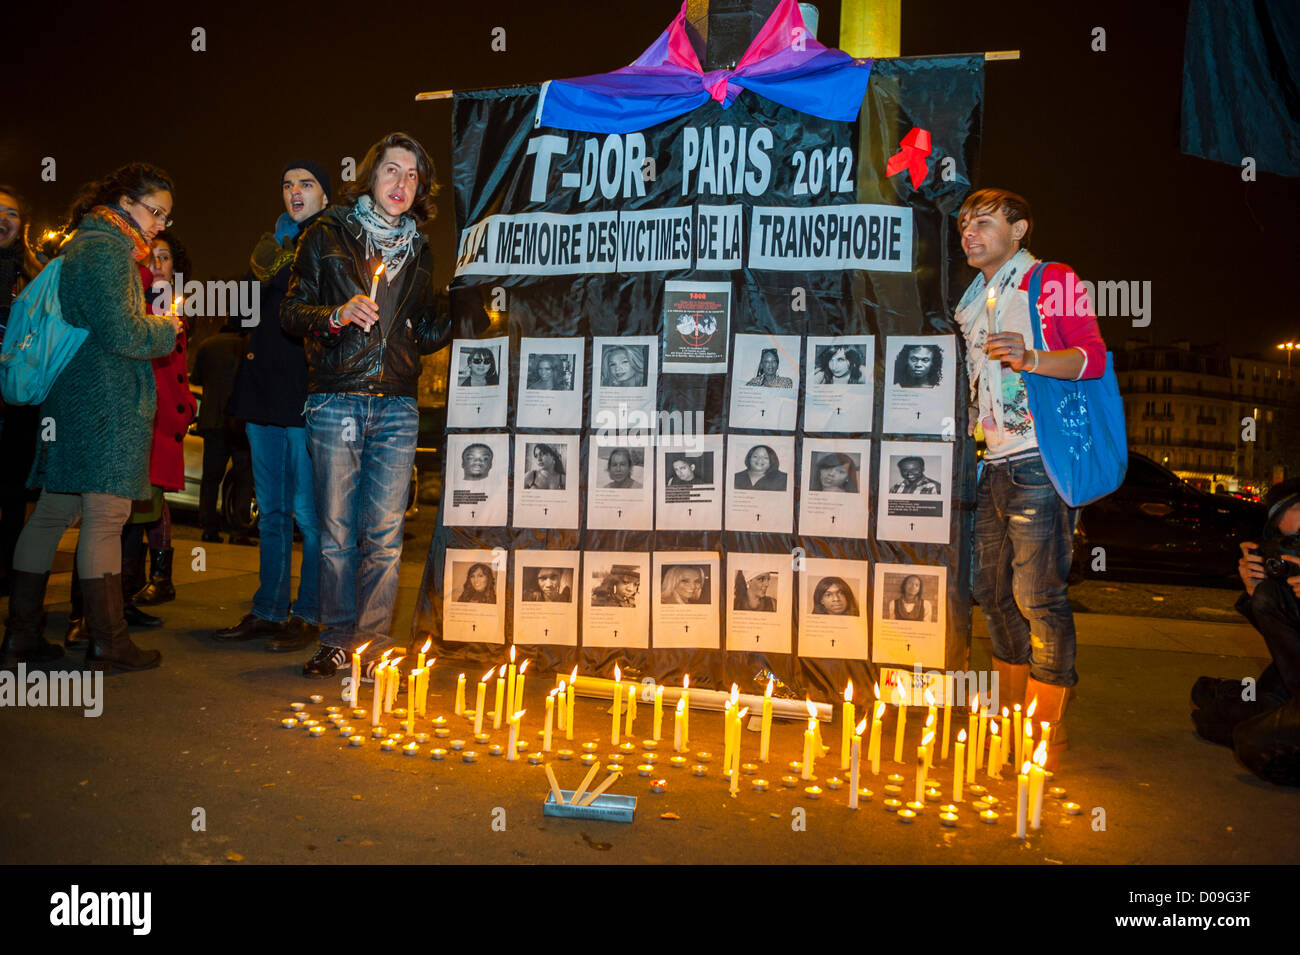 Paris, France, Group People, Women, Candlelight Memorial, International Transgender, Transsexual Memorial Day, 'T-Dor', Protests on street at night, homophobia transphobia Stock Photo